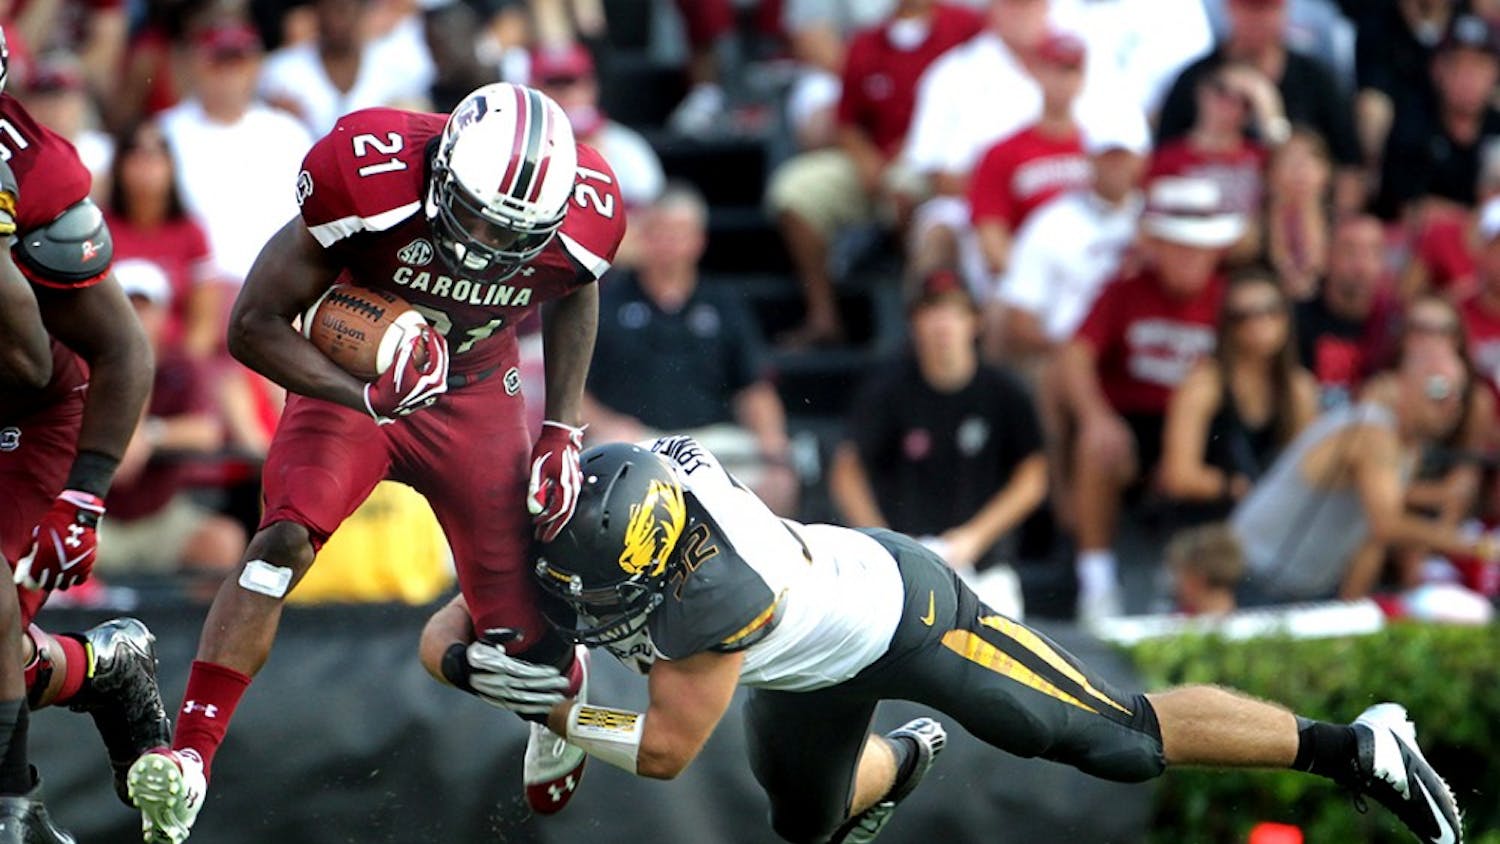 University of South Carolina&apos;s Marcus Lattimore (21) breaks a tackle by Missouri&apos;s Will Ebner in the fourth quarter at William-Brice Stadium in Columbia, South Carolina, Saturday, September 22, 2012. South Carolina defeated Missouri, 31-10. (C. Aluka Berry/The State/MCT)